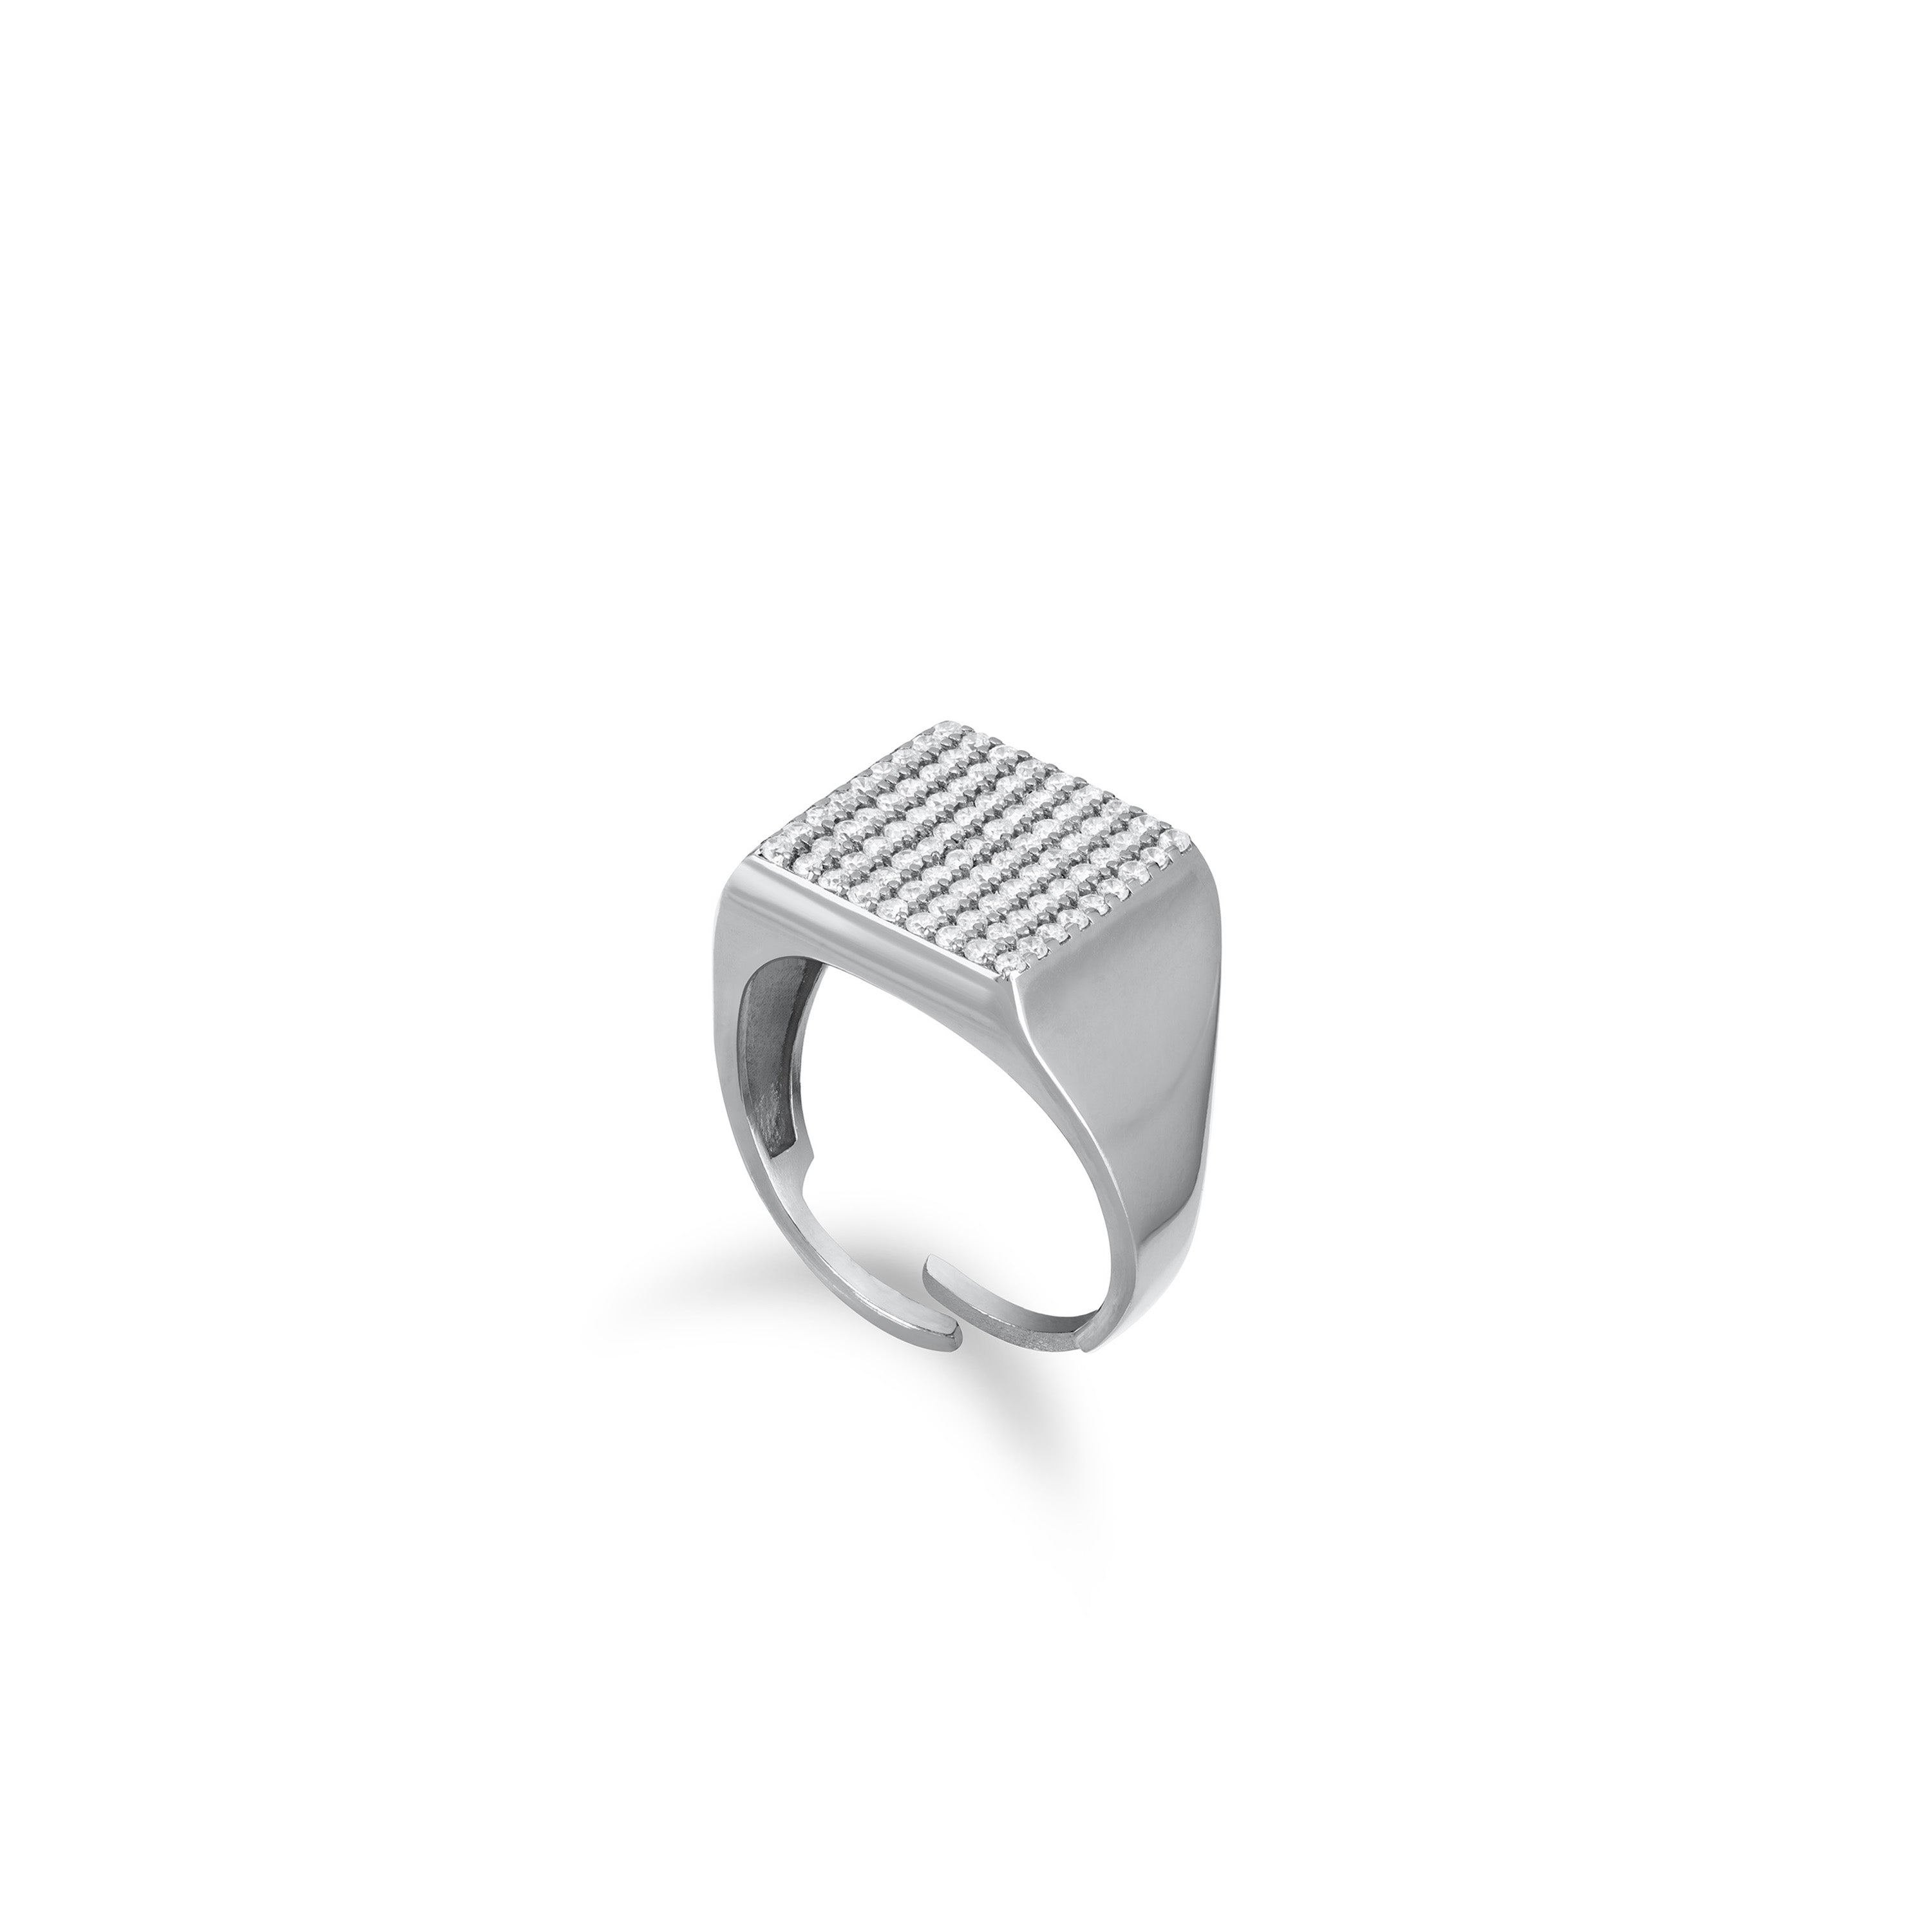 Pave Square Signet Pinky Ring